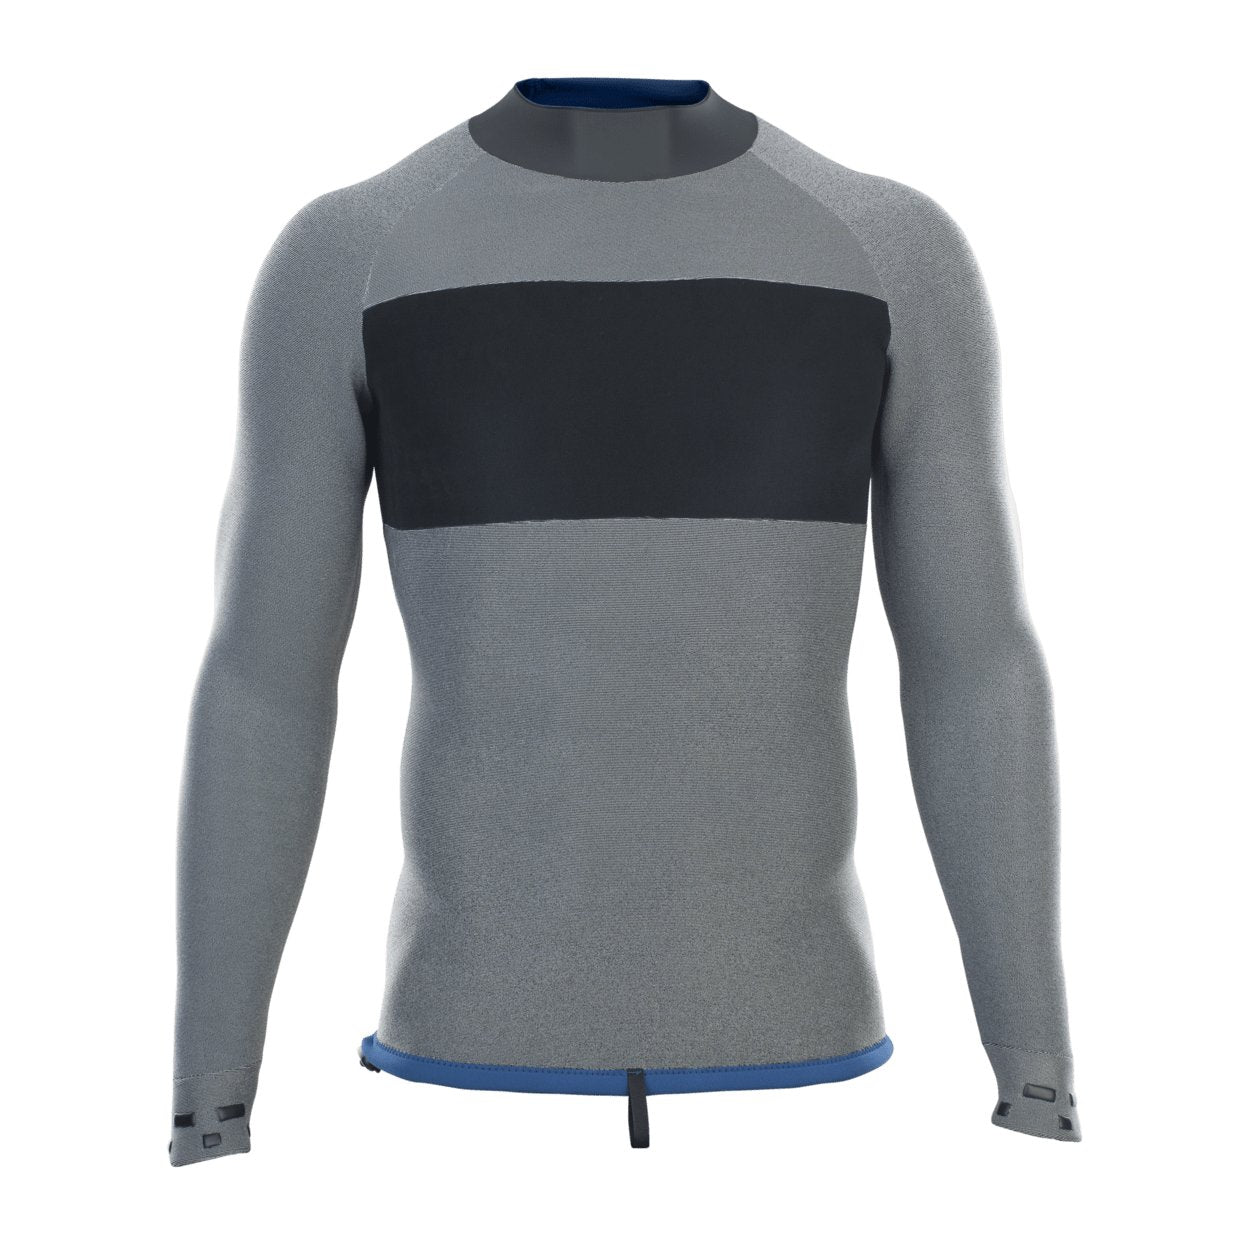 ION Neo Top 2/2 LS men 2023 - Worthing Watersports - 9010583091556 - Tops - ION Water